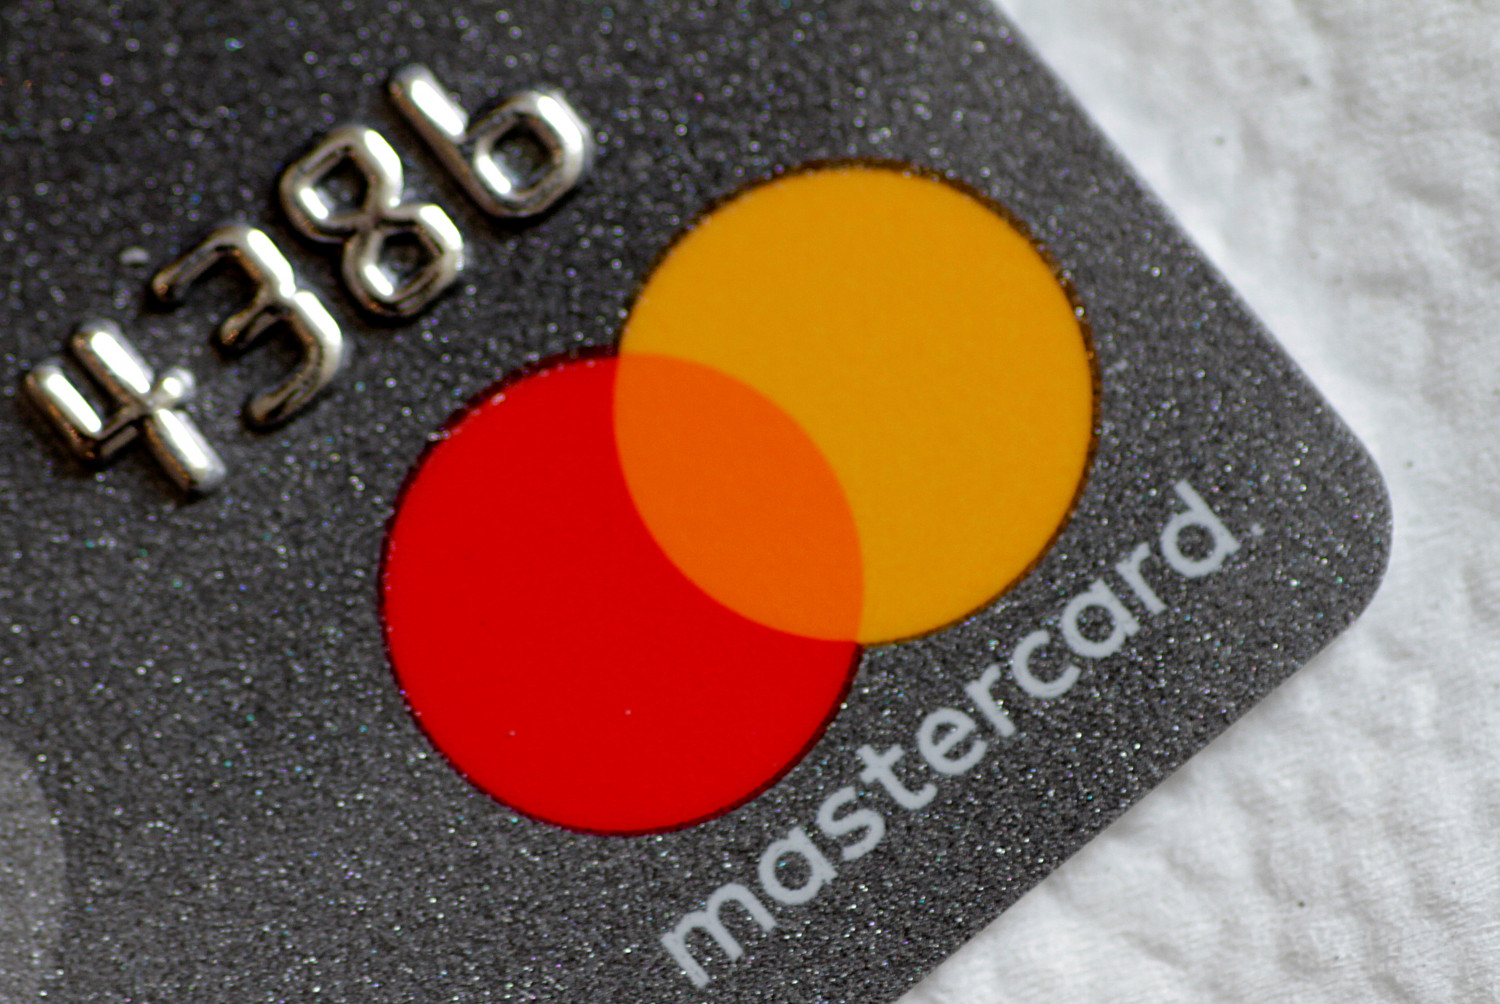 mastercard a suivre a wall street 